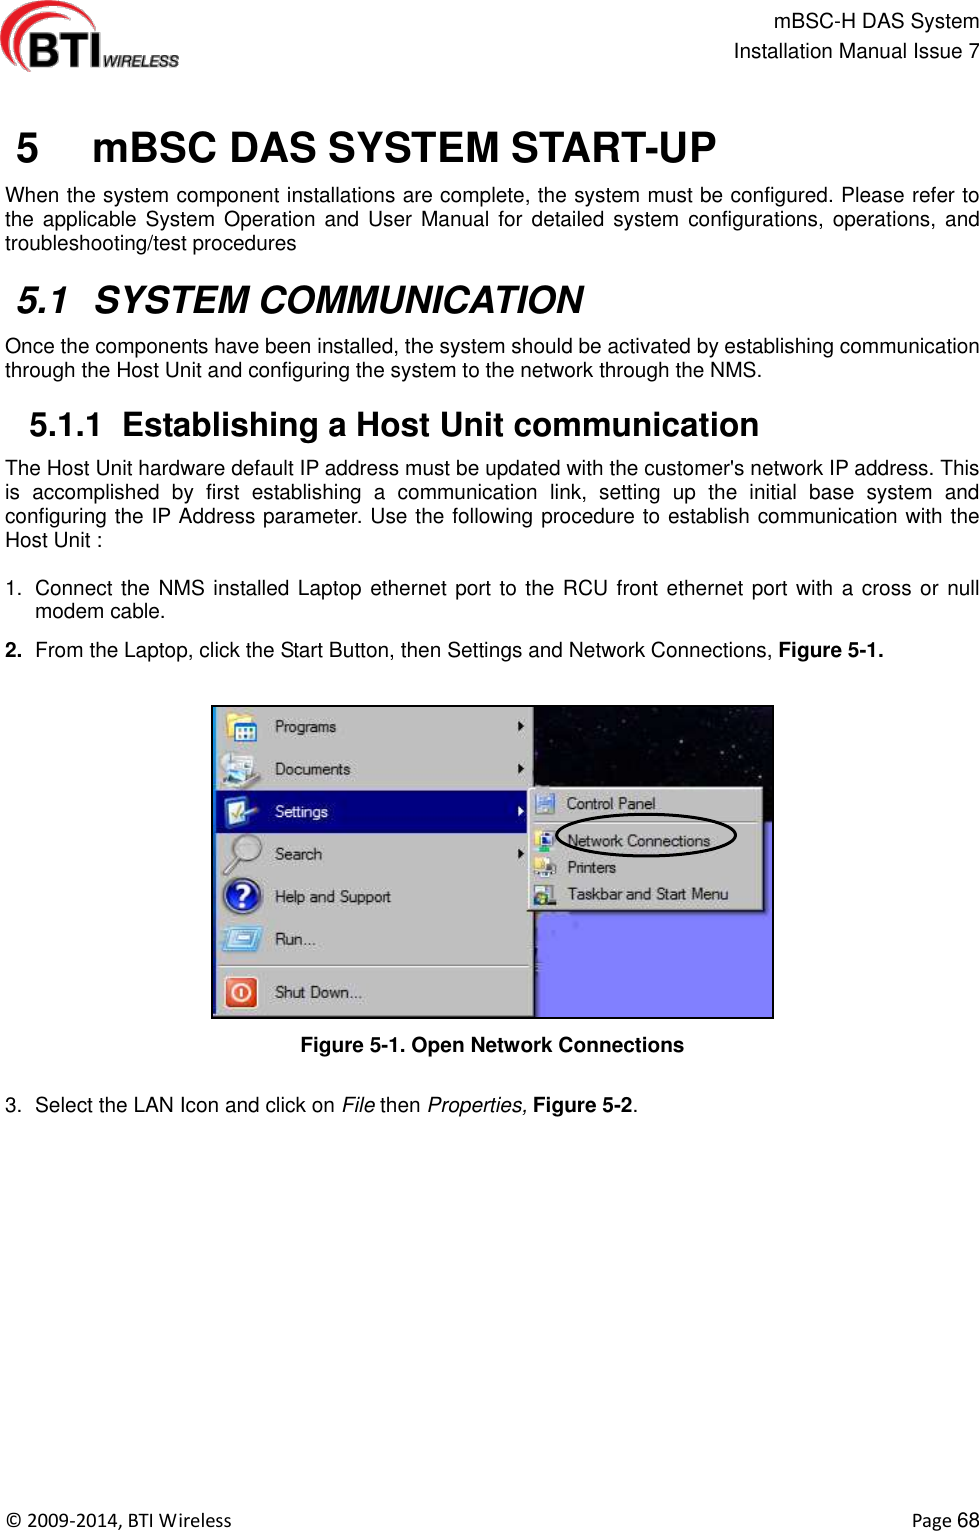                                                   mBSC-H DAS System   Installation Manual Issue 7  ©  2009-2014, BTI Wireless    Page 68    5   mBSC DAS SYSTEM START-UP When the system component installations are complete, the system must be configured. Please refer to the applicable System  Operation and  User  Manual for  detailed system  configurations,  operations,  and troubleshooting/test procedures     5.1  SYSTEM COMMUNICATION Once the components have been installed, the system should be activated by establishing communication through the Host Unit and configuring the system to the network through the NMS.   5.1.1  Establishing a Host Unit communication The Host Unit hardware default IP address must be updated with the customer&apos;s network IP address. This is  accomplished  by  first  establishing  a  communication  link,  setting  up  the  initial  base  system  and configuring the IP Address parameter. Use the following procedure to establish communication with the Host Unit :  1.  Connect the NMS installed Laptop ethernet port to the RCU front ethernet port with a cross or null modem cable. 2. From the Laptop, click the Start Button, then Settings and Network Connections, Figure 5-1.  Figure 5-1. Open Network Connections  3.  Select the LAN Icon and click on File then Properties, Figure 5-2.   